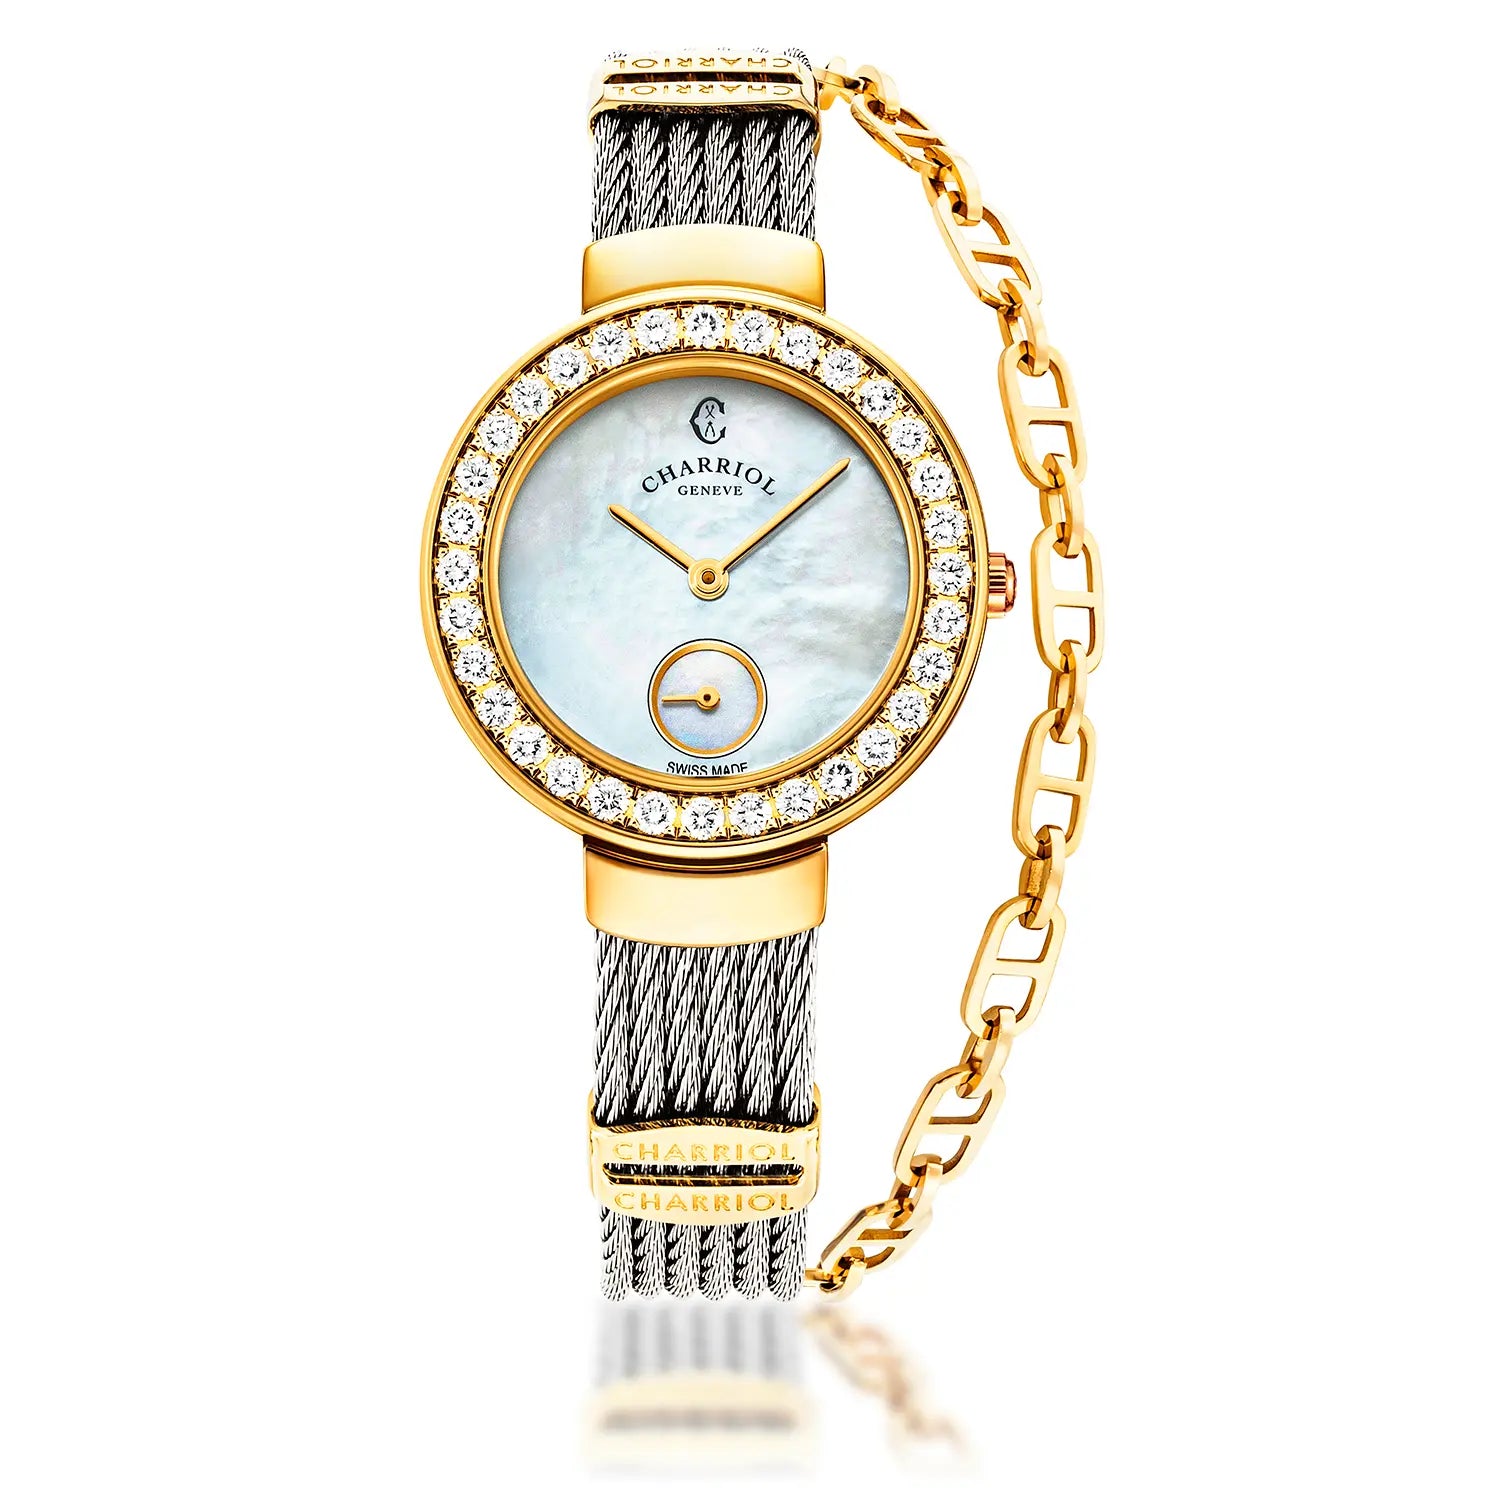 ST TROPEZ, 30MM, QUARTZ CALIBRE, WHITE MOTHER-OF-PEARL DIAL, YELLOW GOLD PVD WITH 32 DIAMONDS BEZEL, STEEL CABLE BRACELET - Charriol Geneve -  Watch